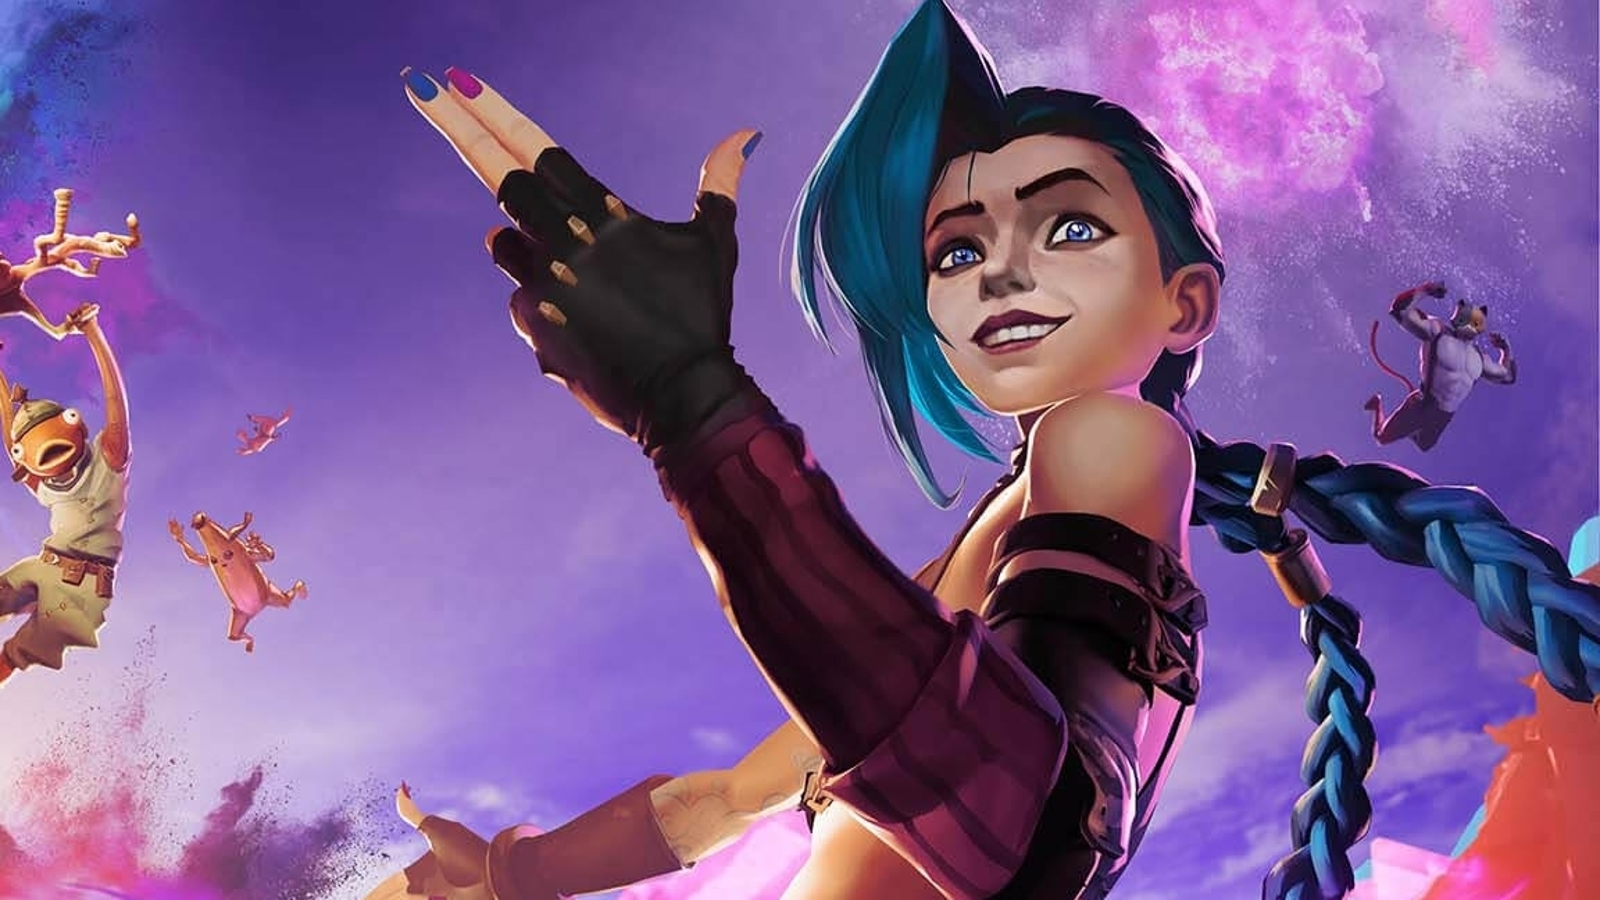 https://assetsio.gnwcdn.com/league-of-legends-jinx-joins-fortnite-ahead-of-netflixs-animated-tv-series-1636063903187.jpg?width=1600&height=900&fit=crop&quality=100&format=png&enable=upscale&auto=webp